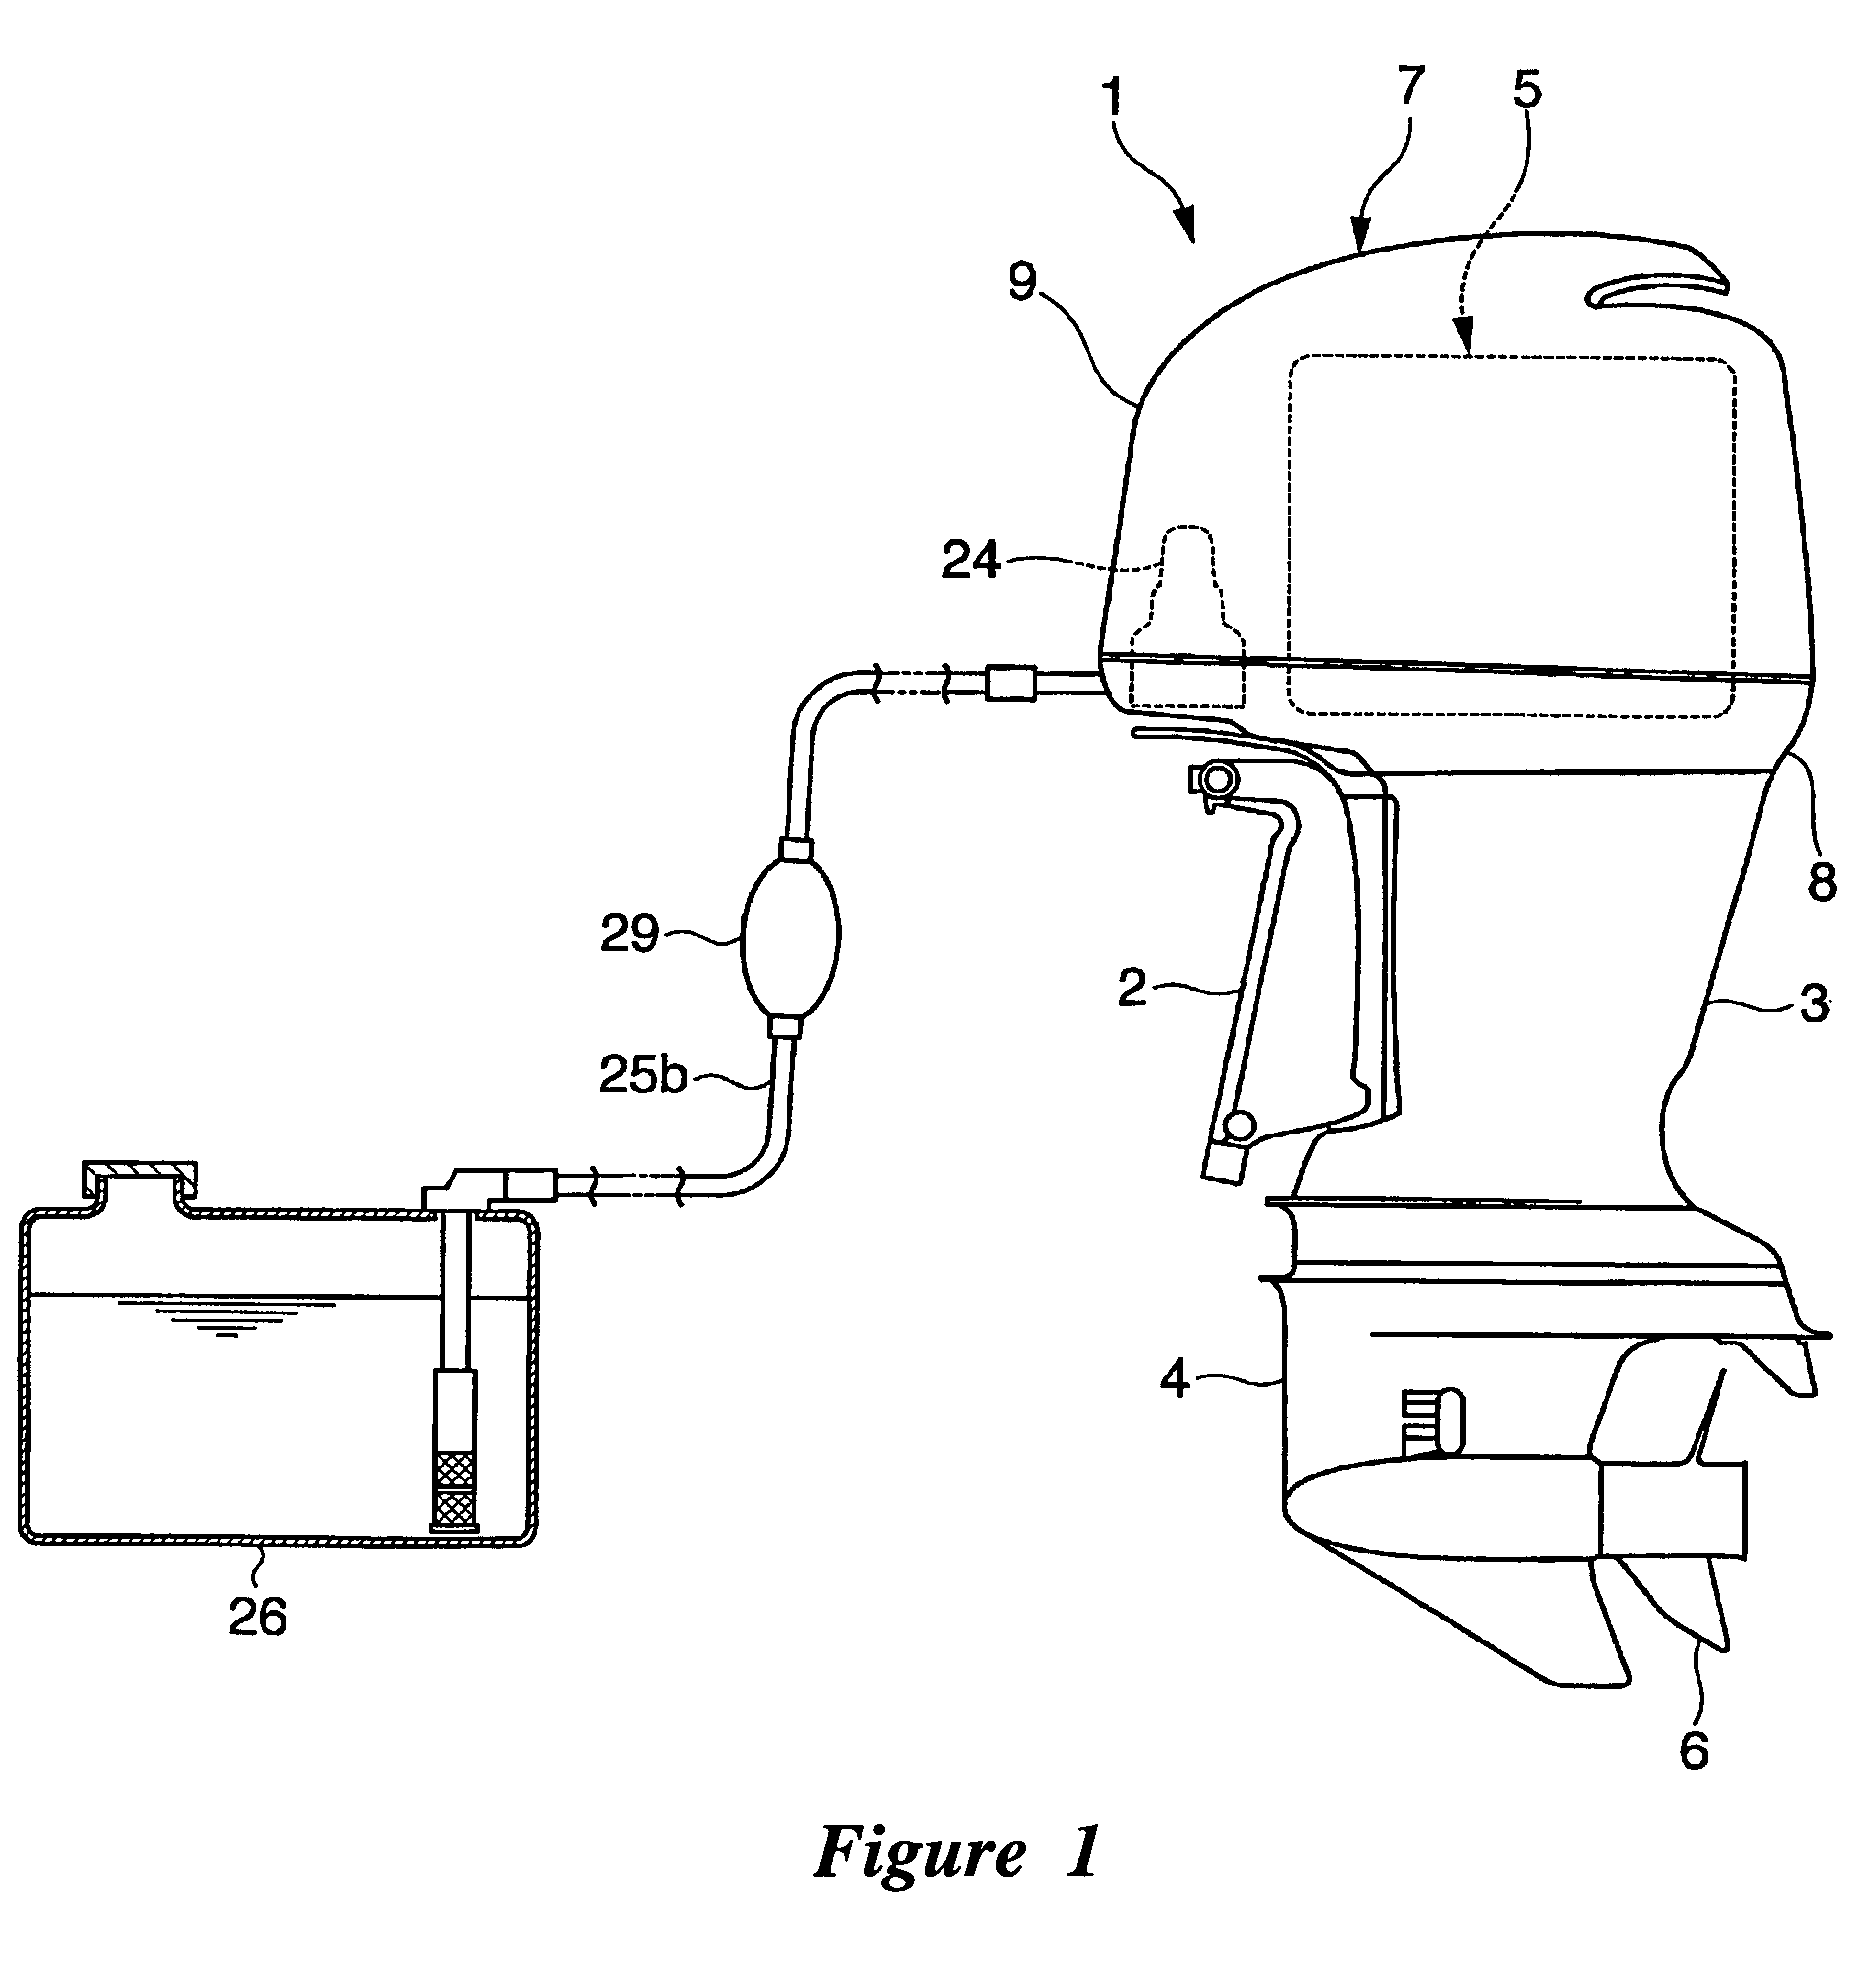 Outboard motor with forward air intake and air-cooled fuel pump